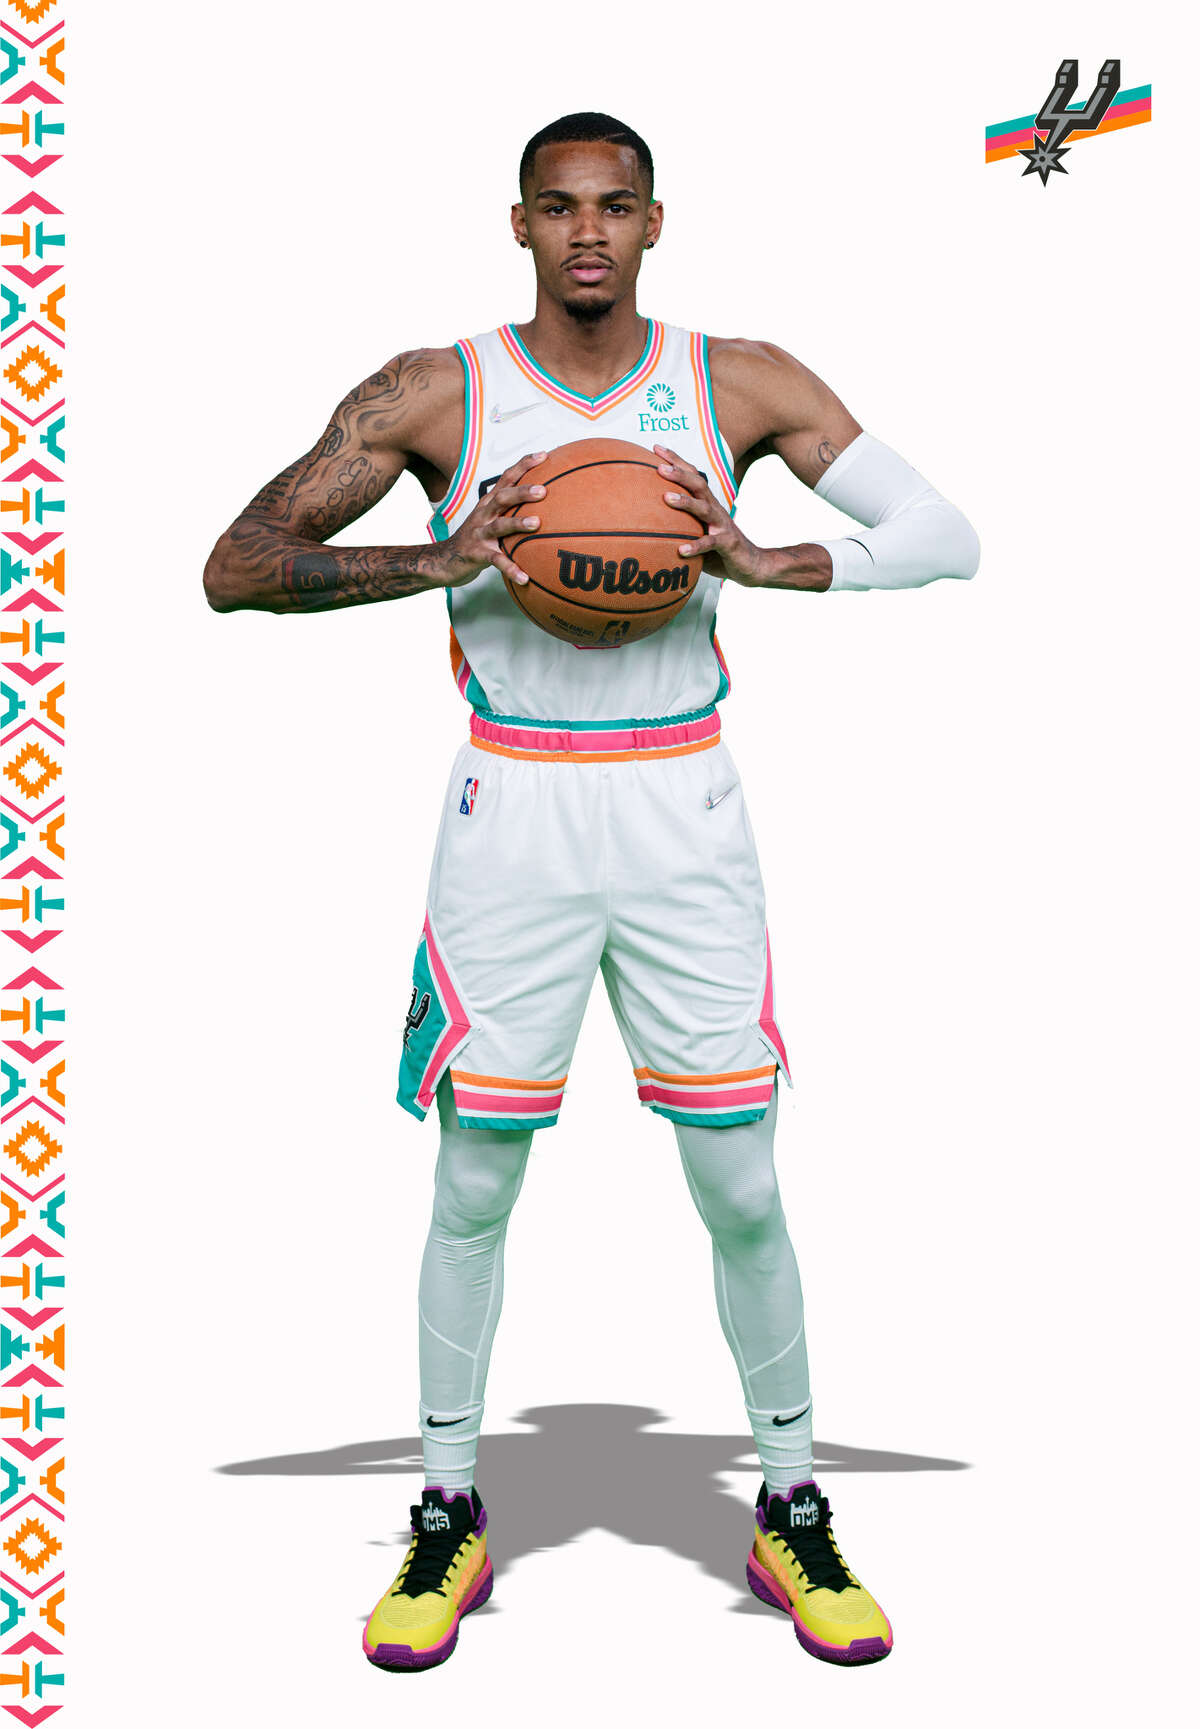 The Spurs new Fiesta jerseys throw it back to the 90s - Article